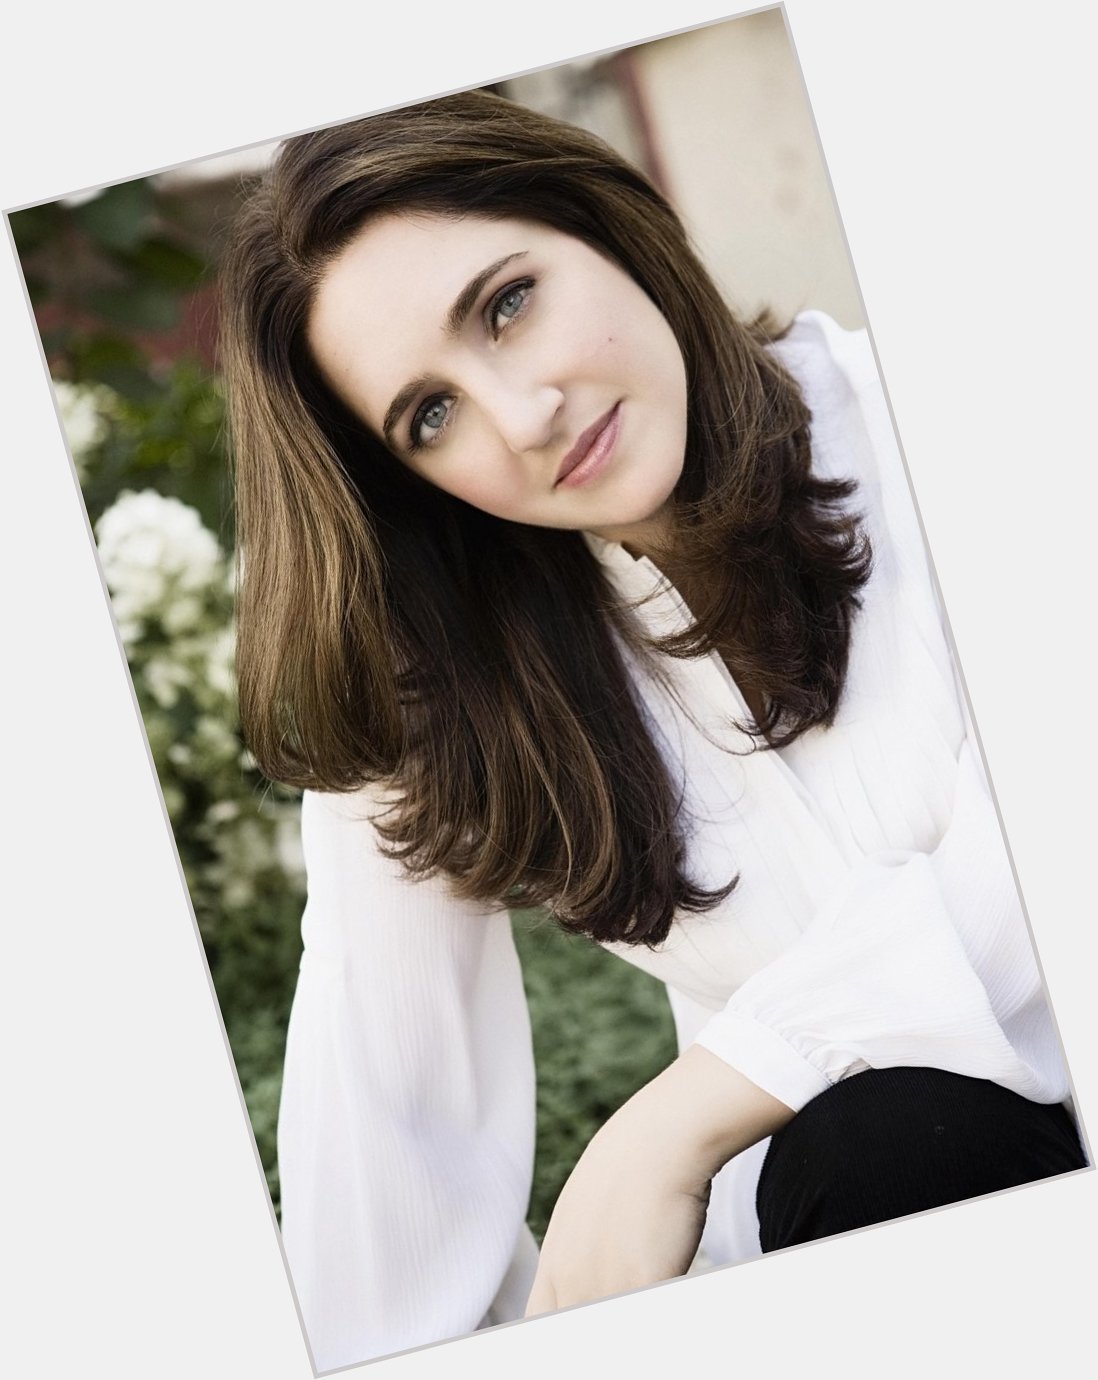 Happy Birthday to pianist Simone Dinnerstein! Can\t wait to hear Rhapsody in Blue & Ravel\s Piano Concerto this year! 